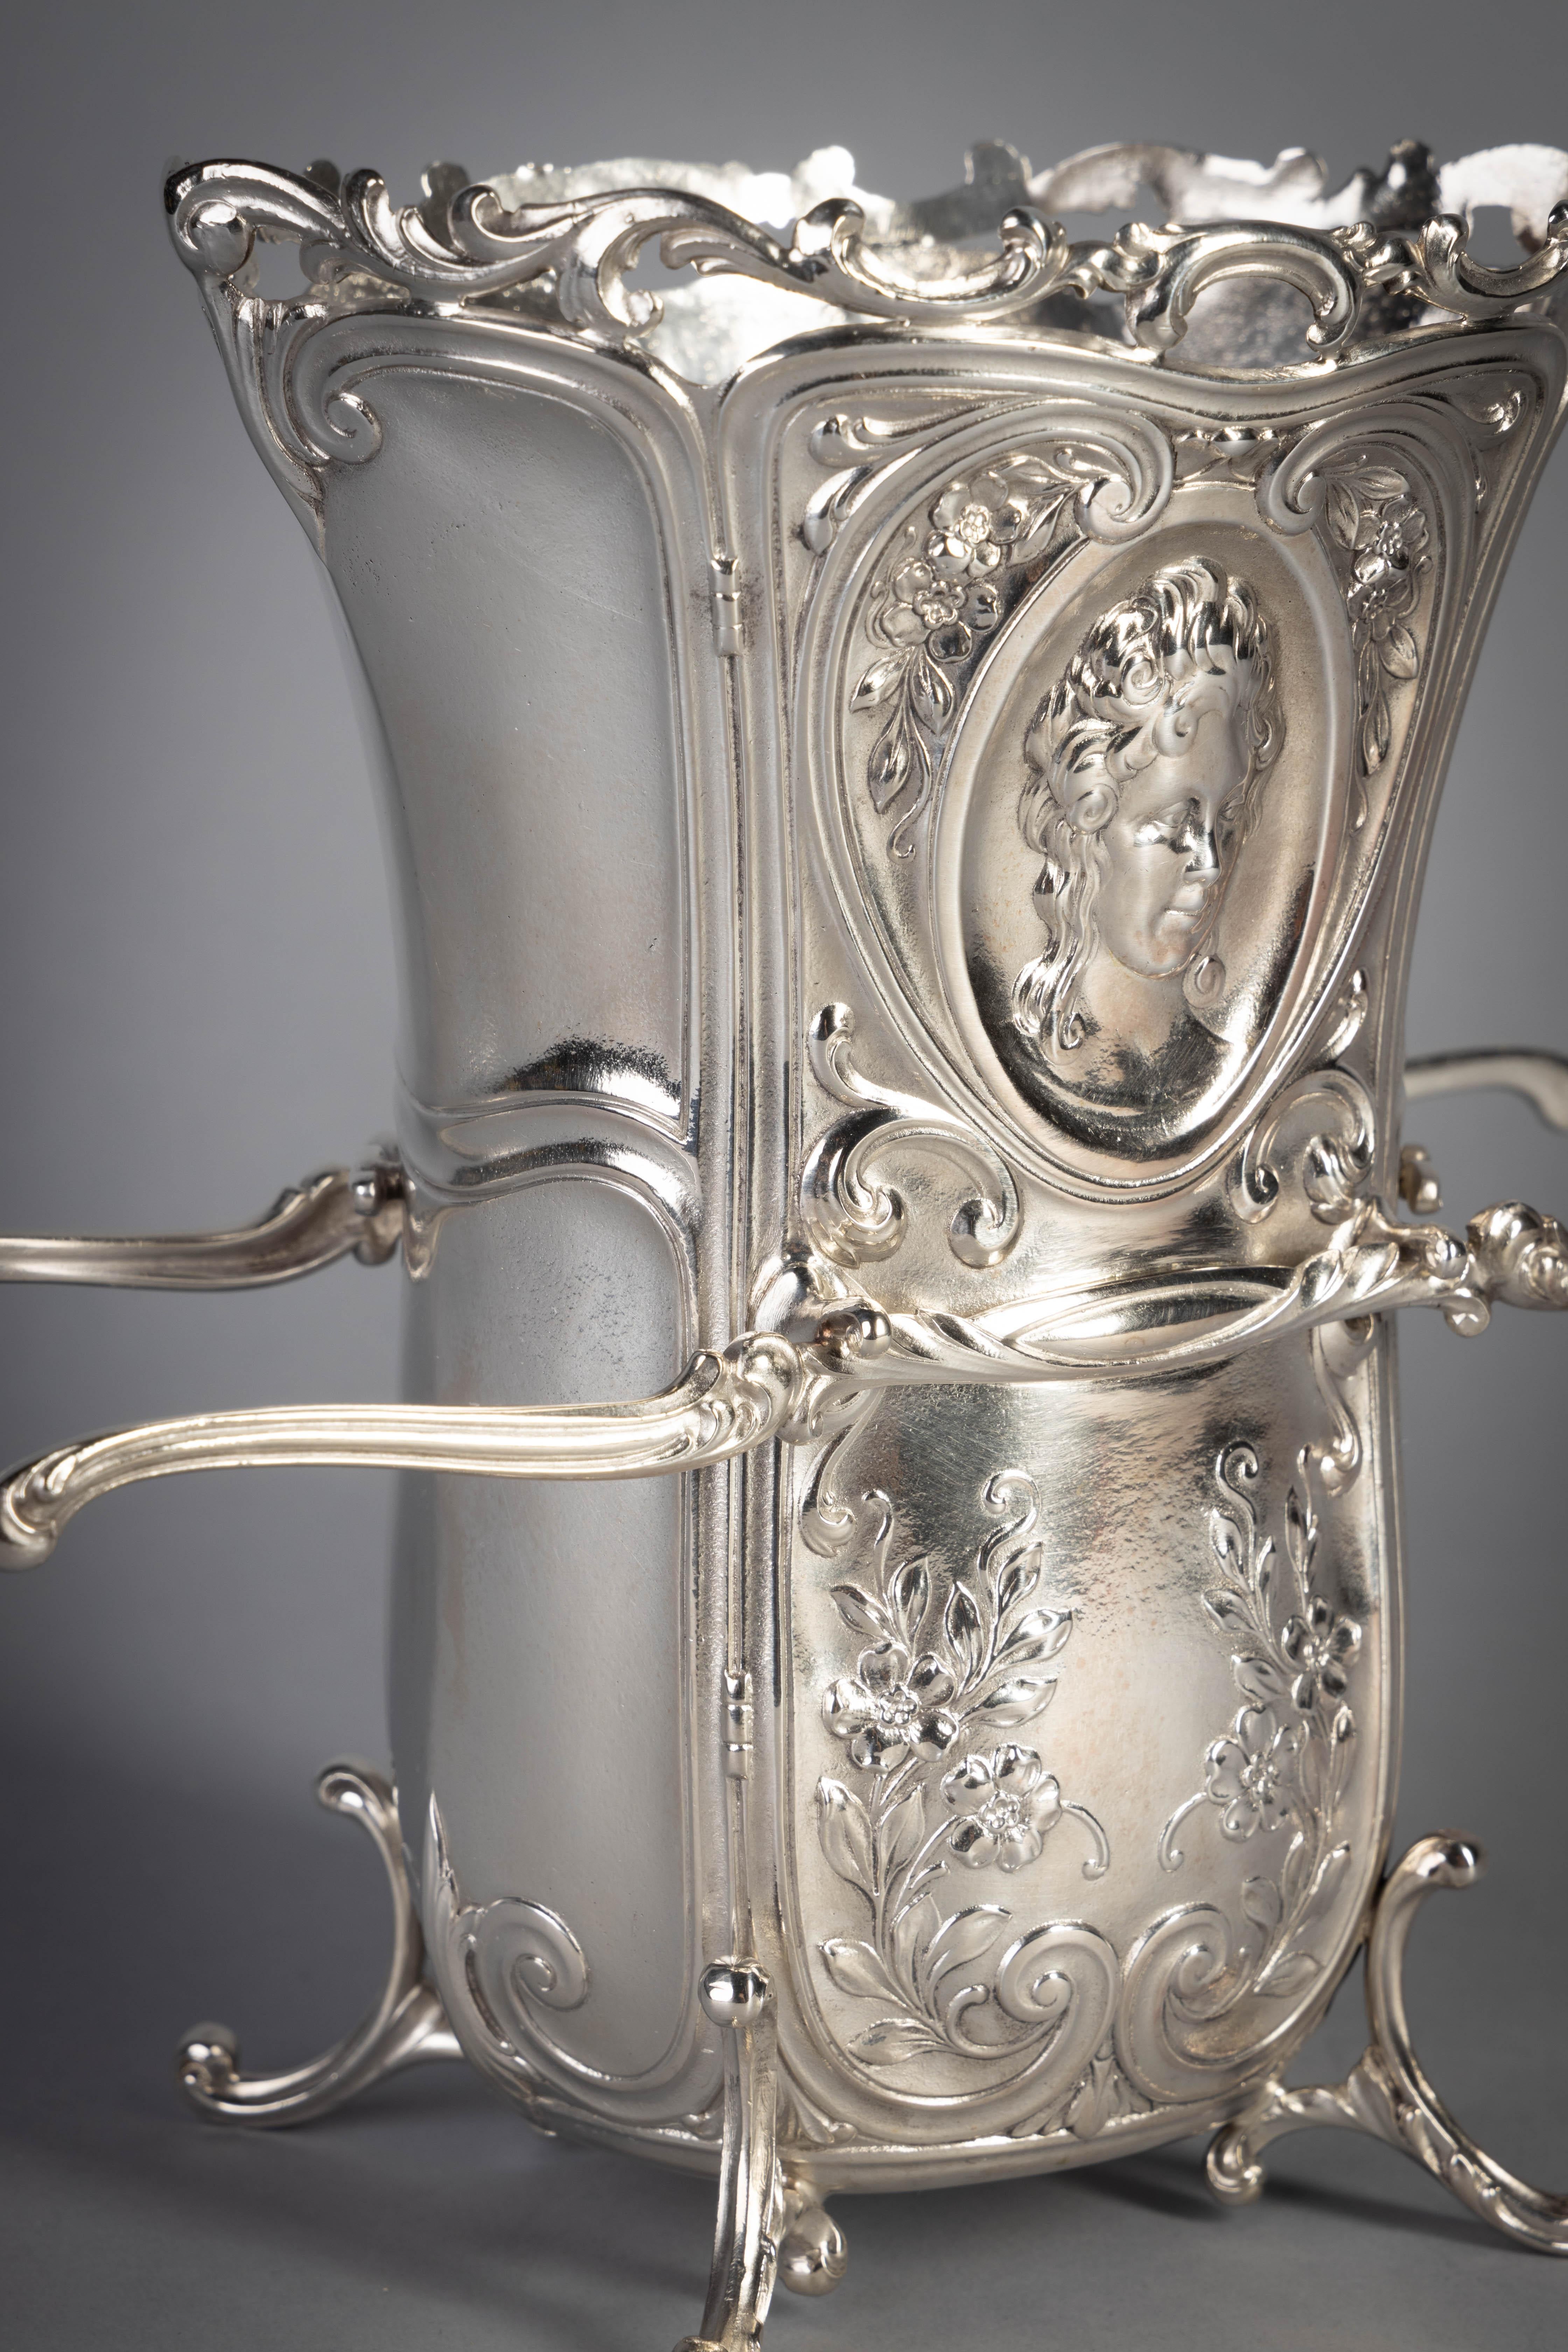 American silver sedan chair-form vase, Durgin Division of Gorham Mfg. Co., Providence, RI, 1931

The front and back cast and chased as doors decorated with floral sprays and oval windows enclosing the bust of a maiden, the sides applied with door